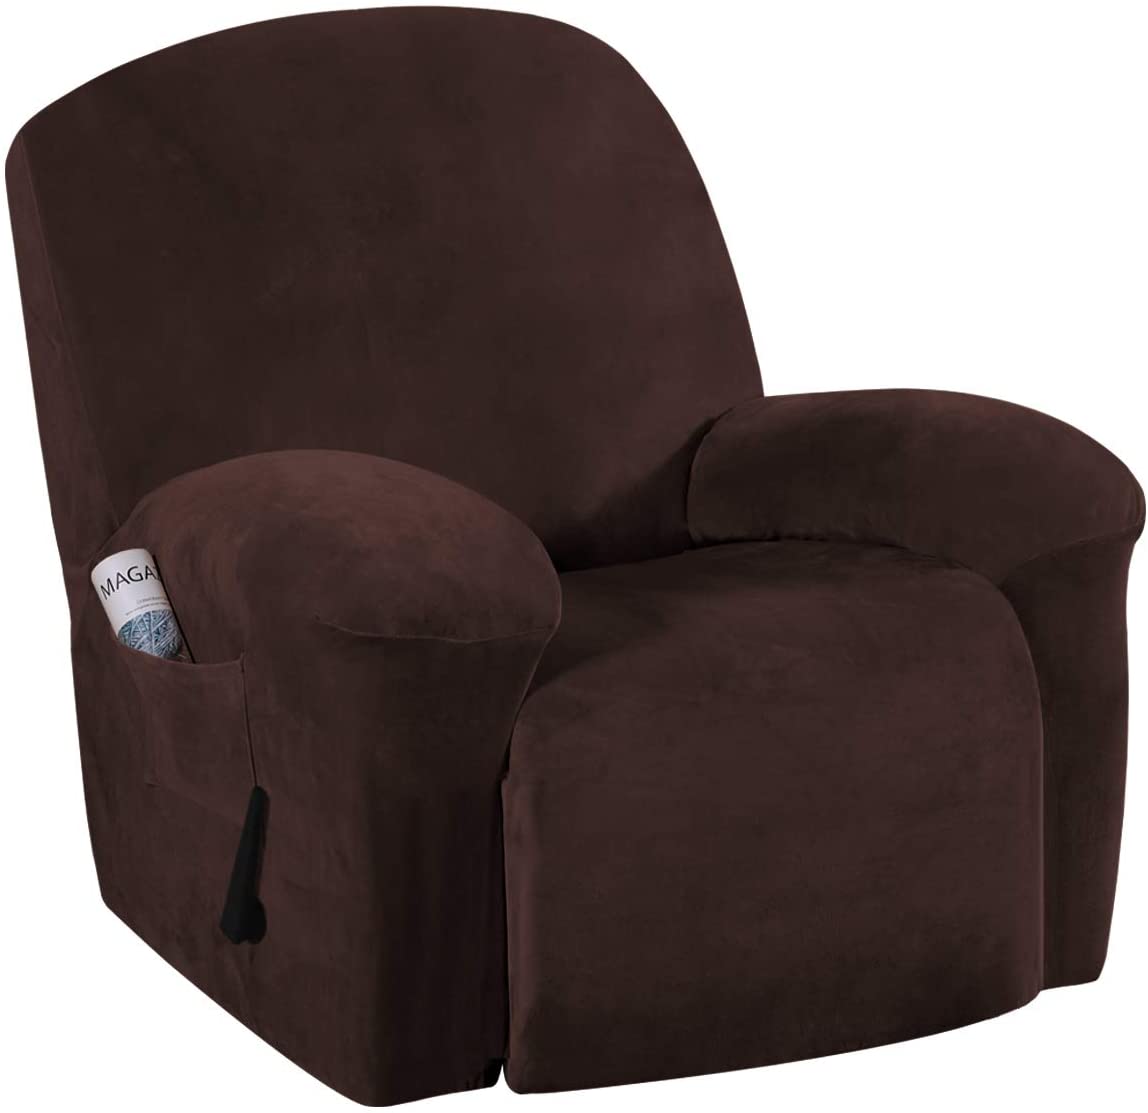 Stretch Recliner Covers